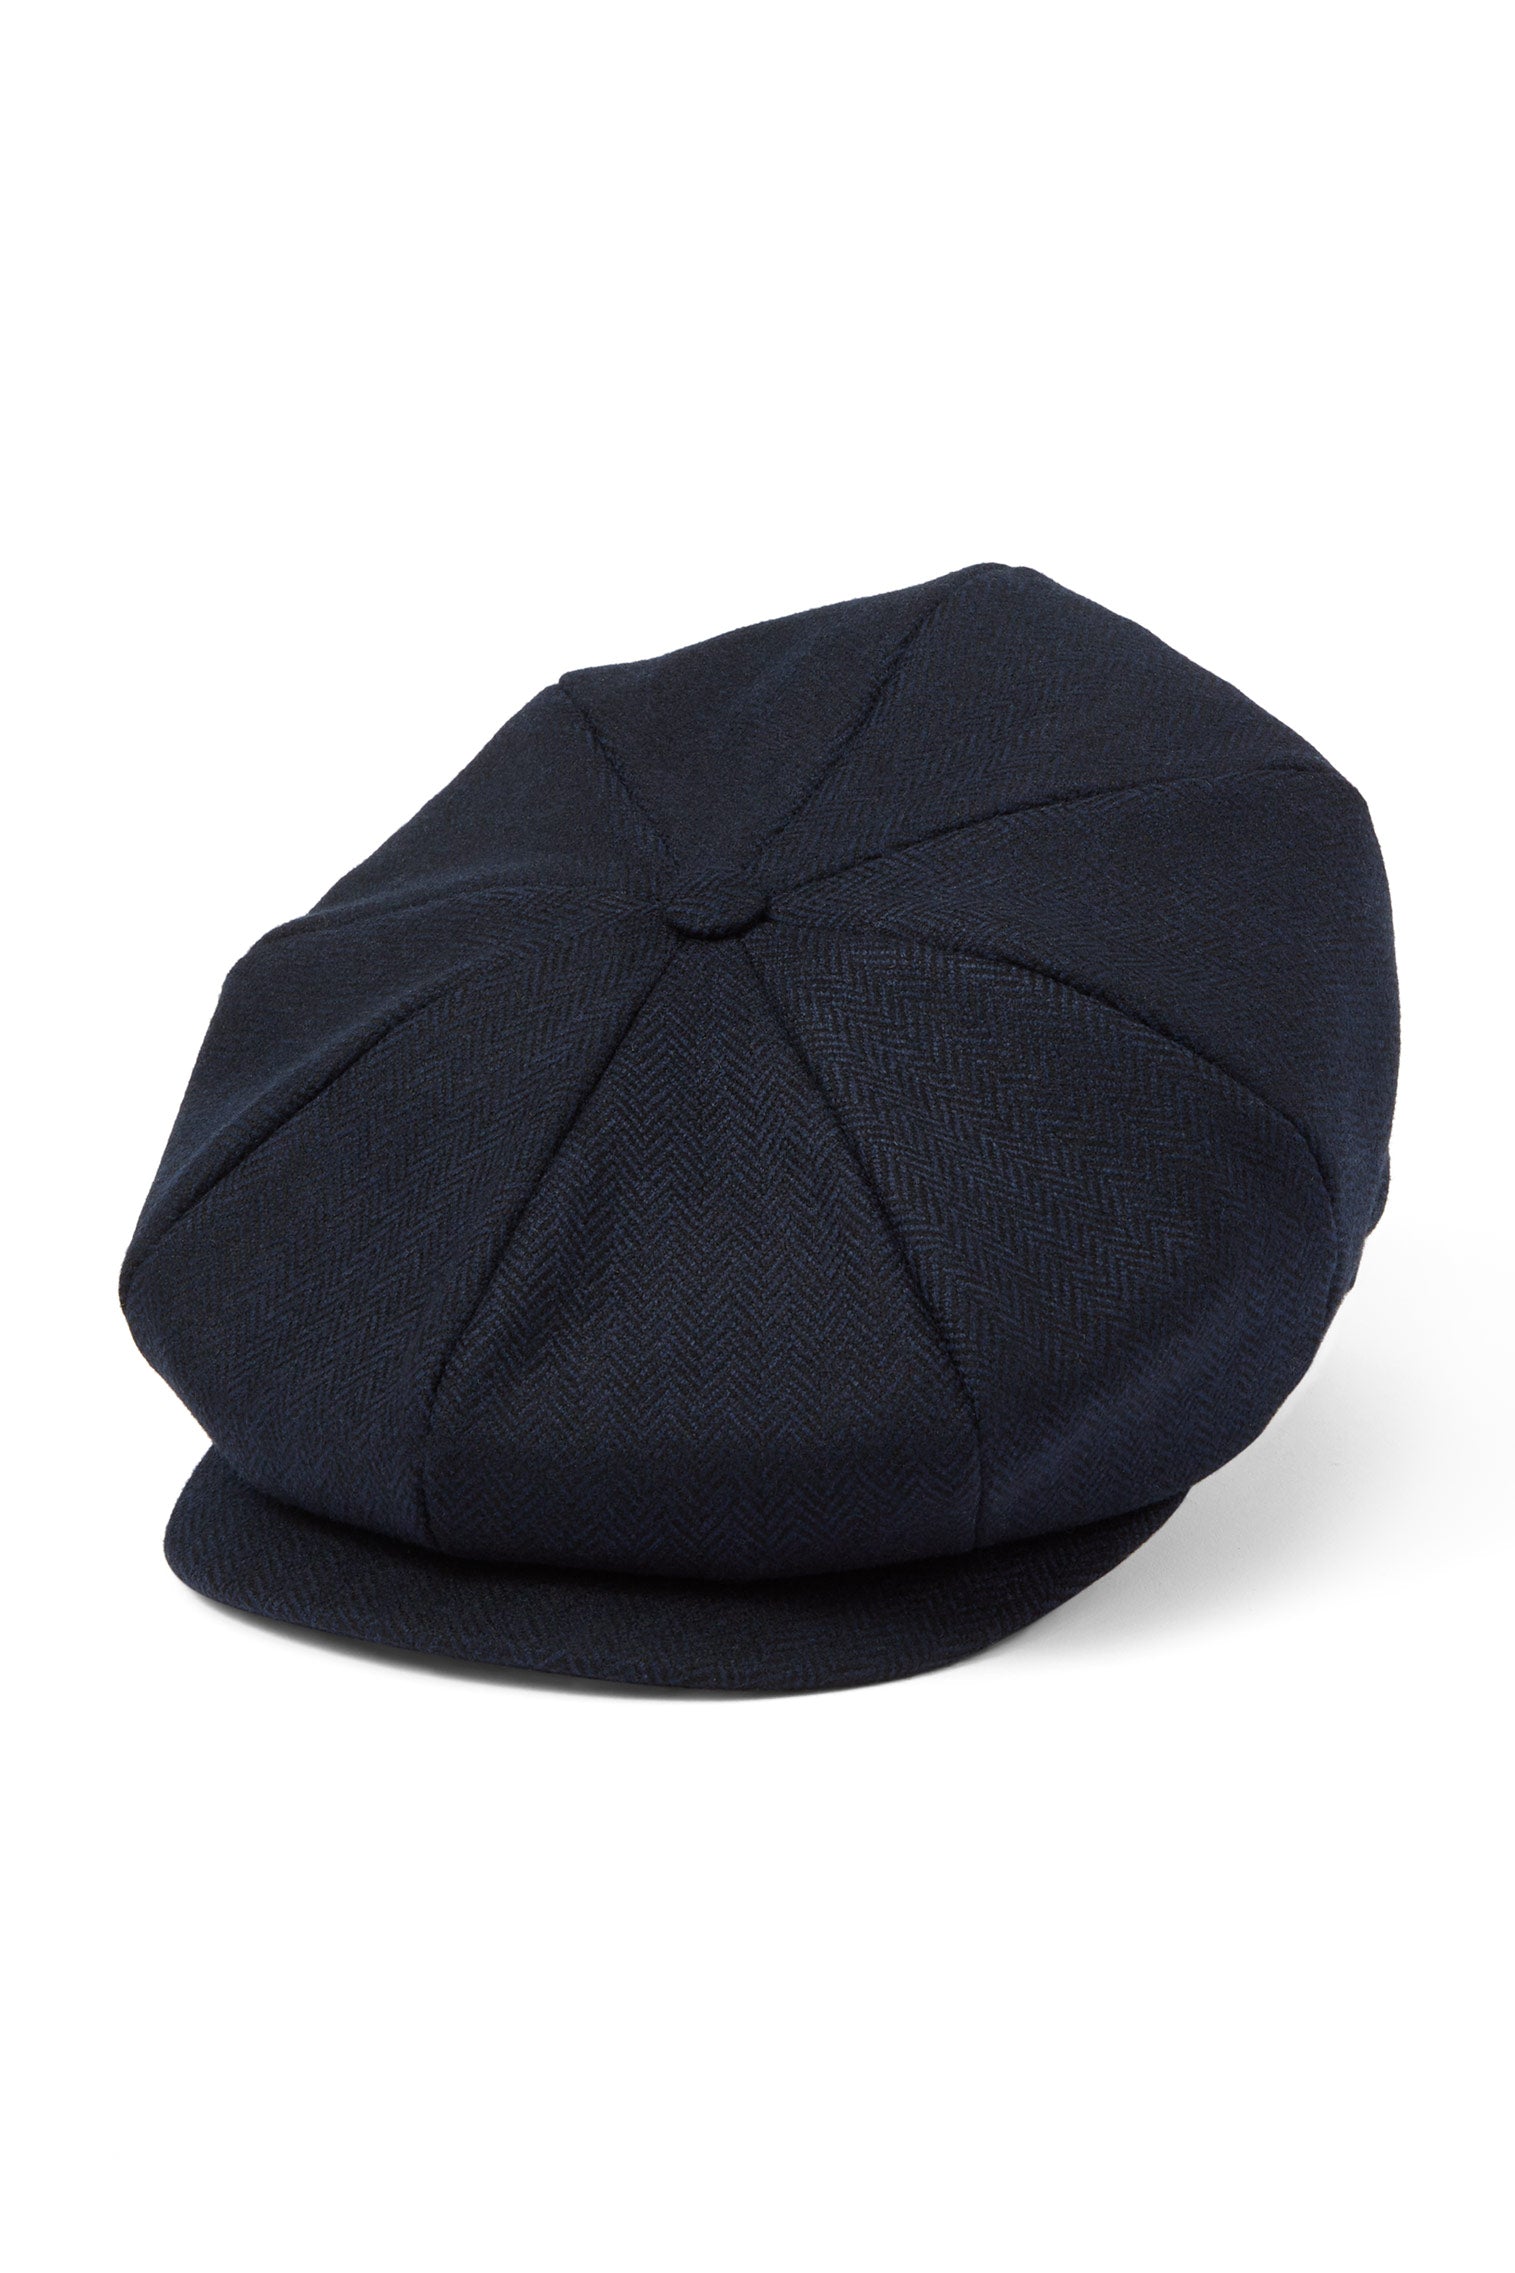 The Sixty - Lock & Co. Christmas Gift Edit - Lock & Co. Hatters London UK